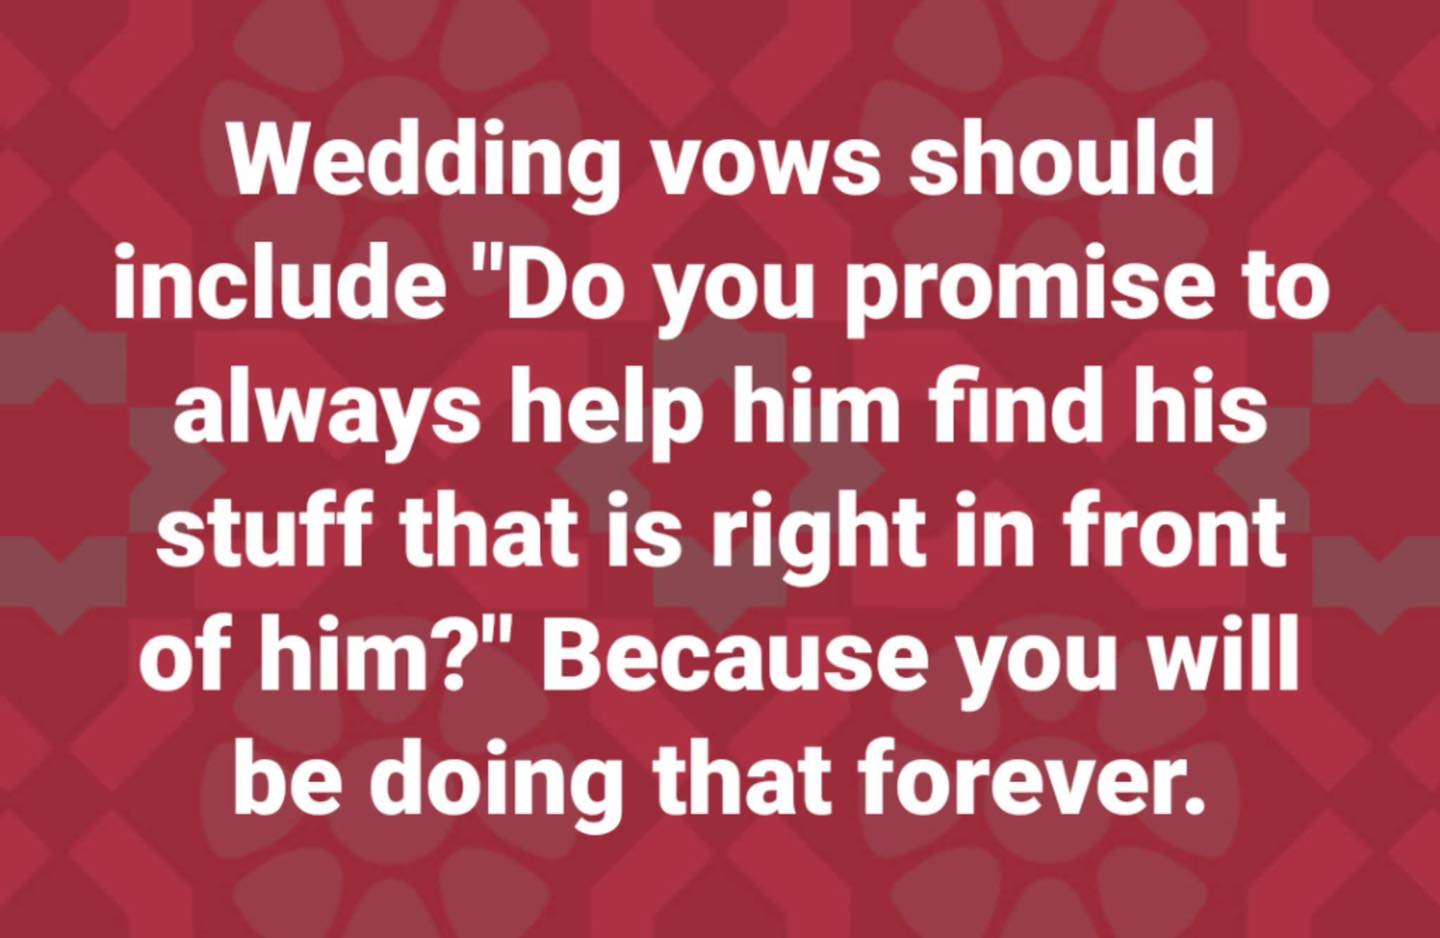 marriage memes - wedding vows should include do you promised - Wedding vows should include "Do you promise to always help him find his stuff that is right in front of him?" Because you will be doing that forever.